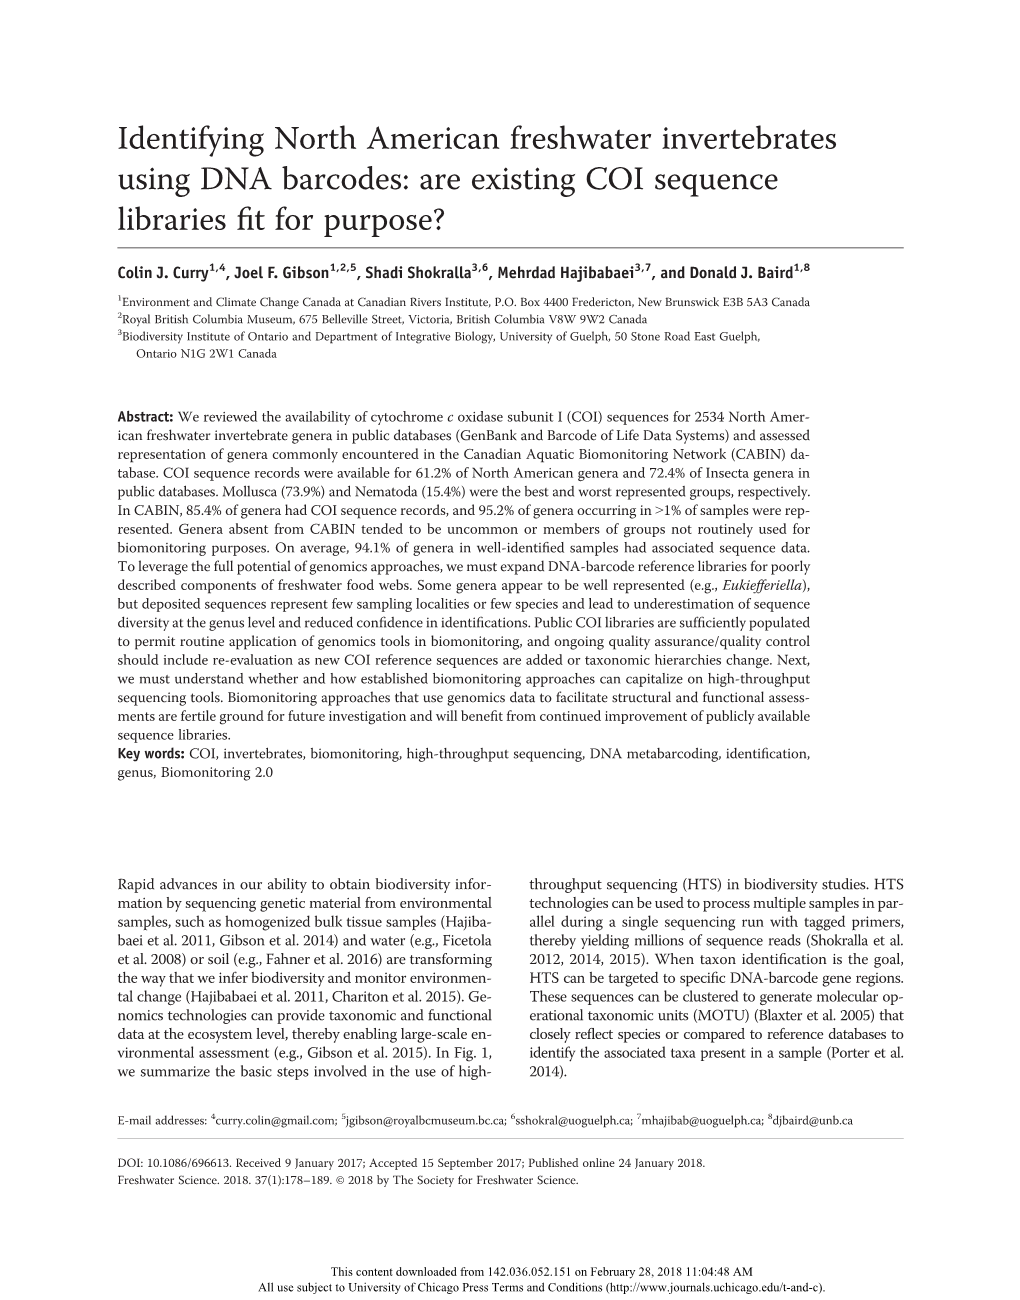 Identifying North American Freshwater Invertebrates Using DNA Barcodes: Are Existing COI Sequence Libraries ﬁt for Purpose?